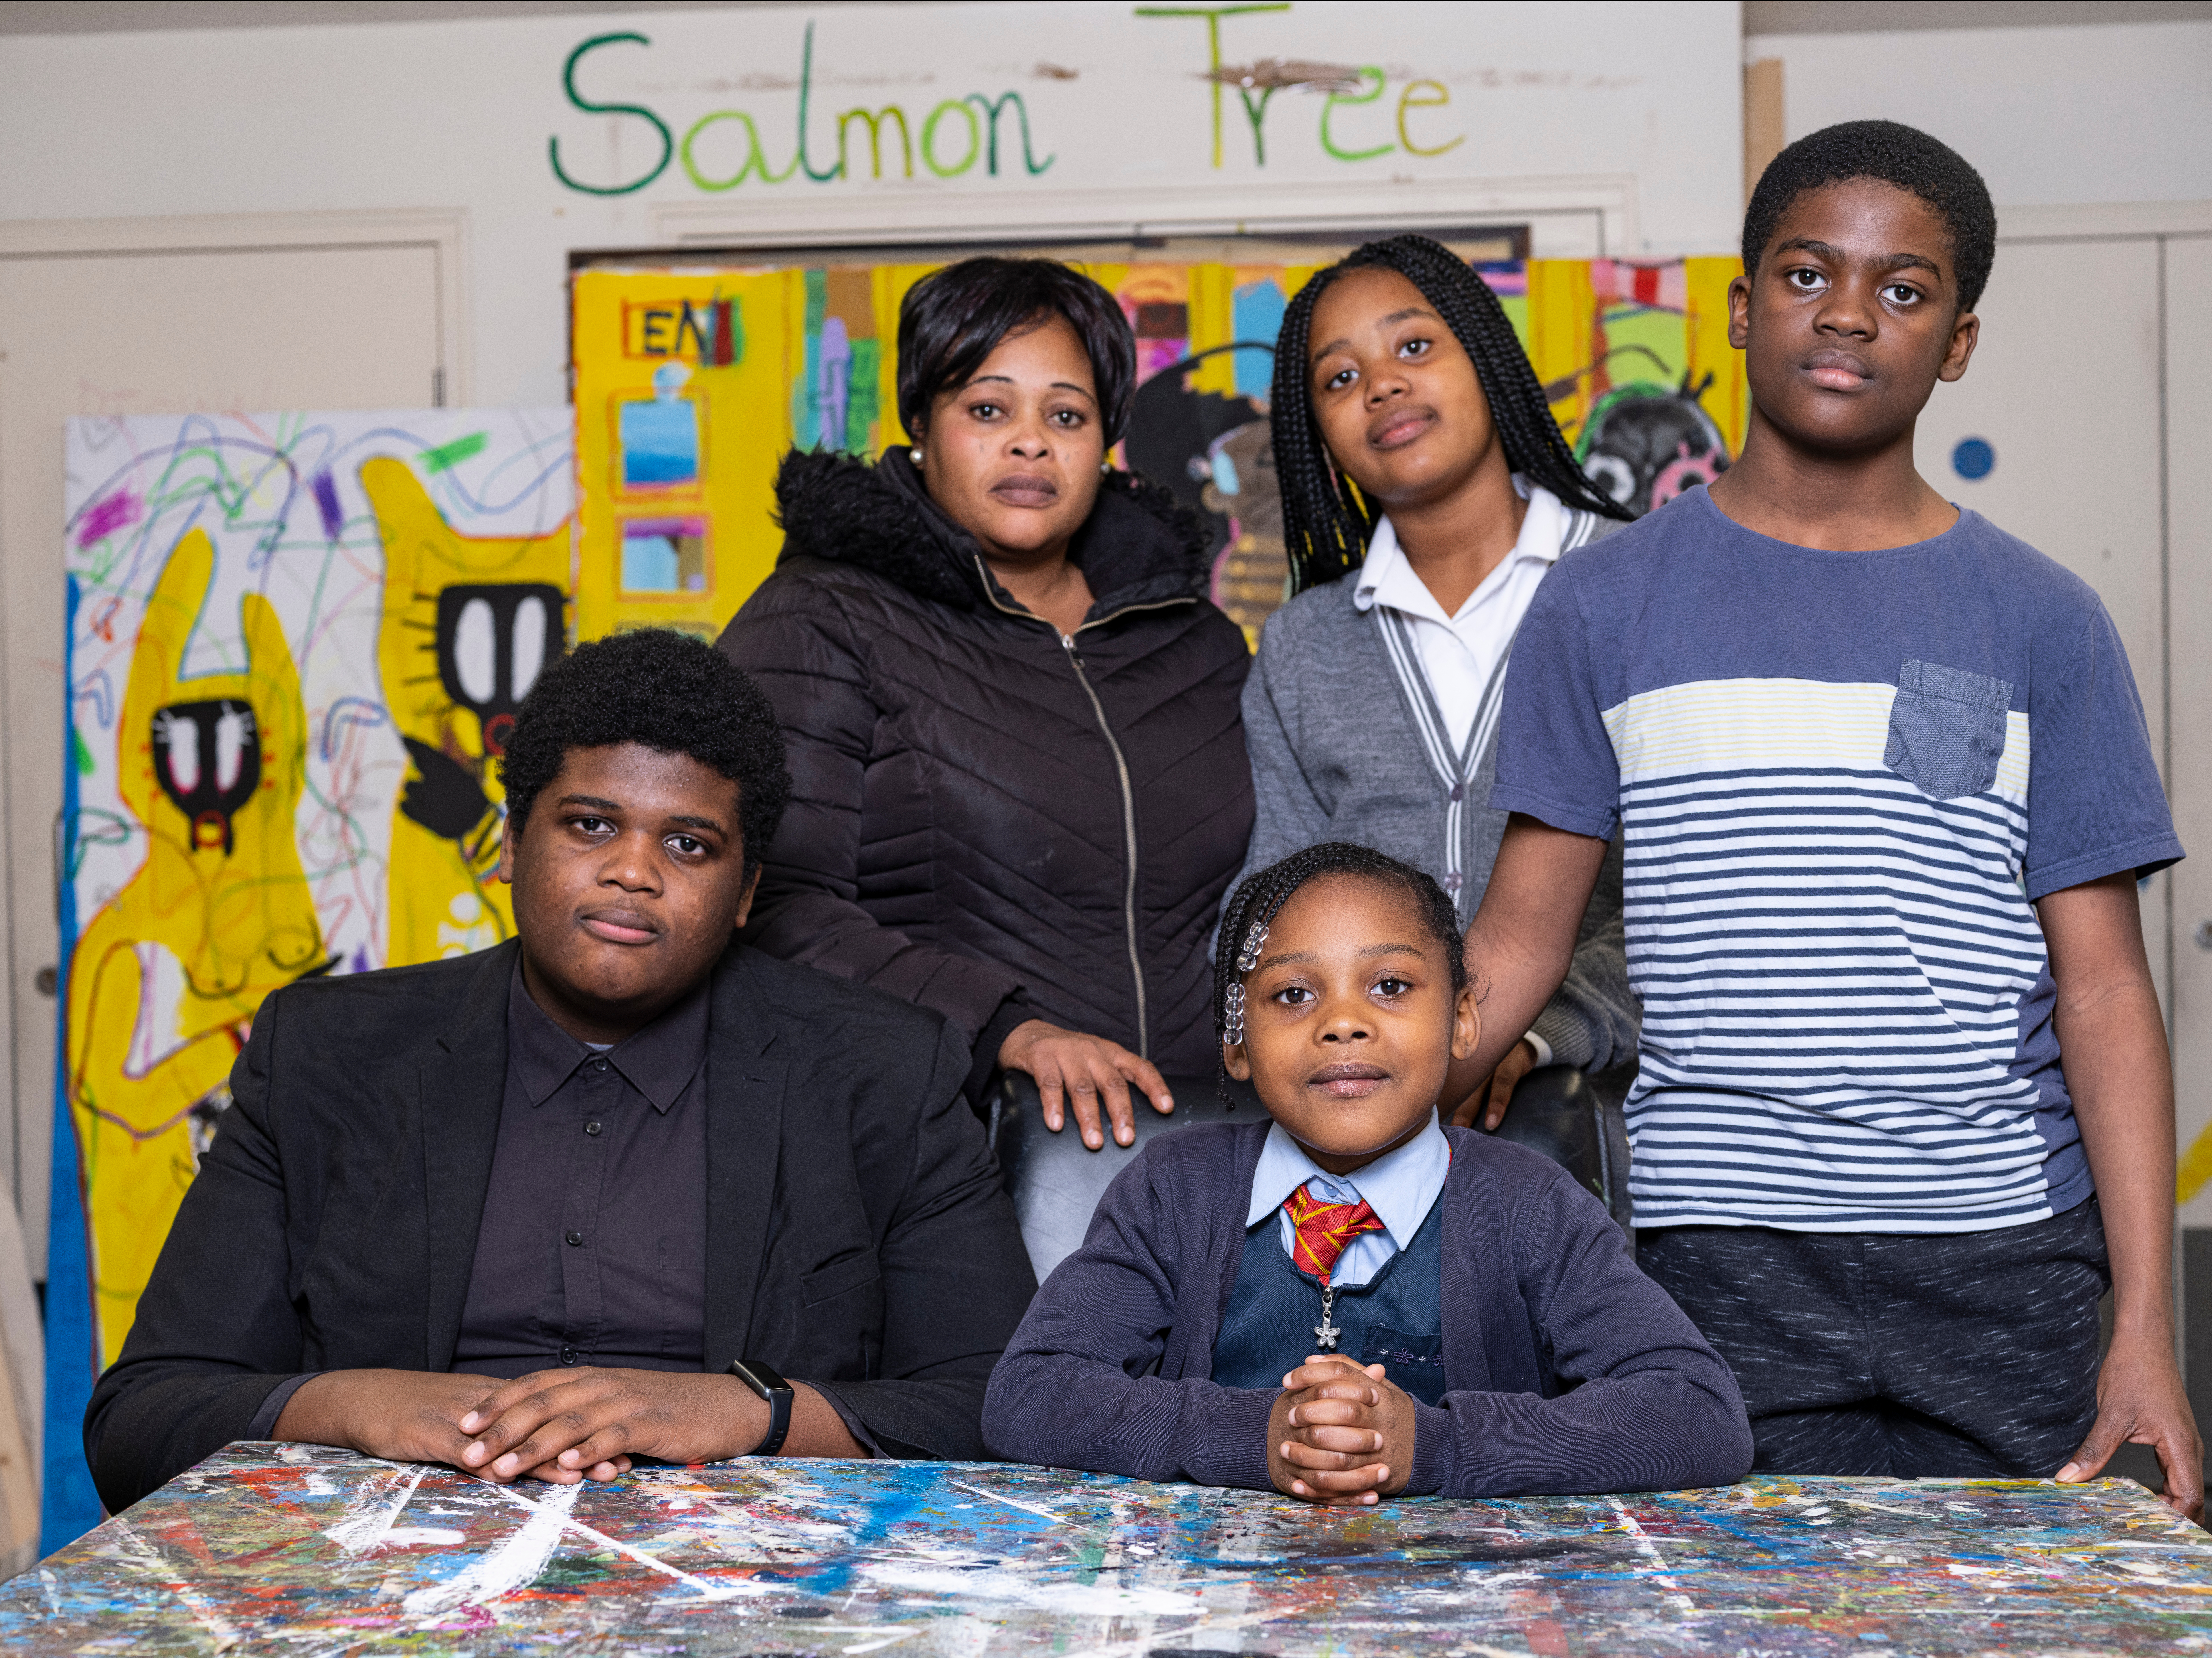 Glory Uhunarabona and her four children are pictured at the Salmon Youth Centre